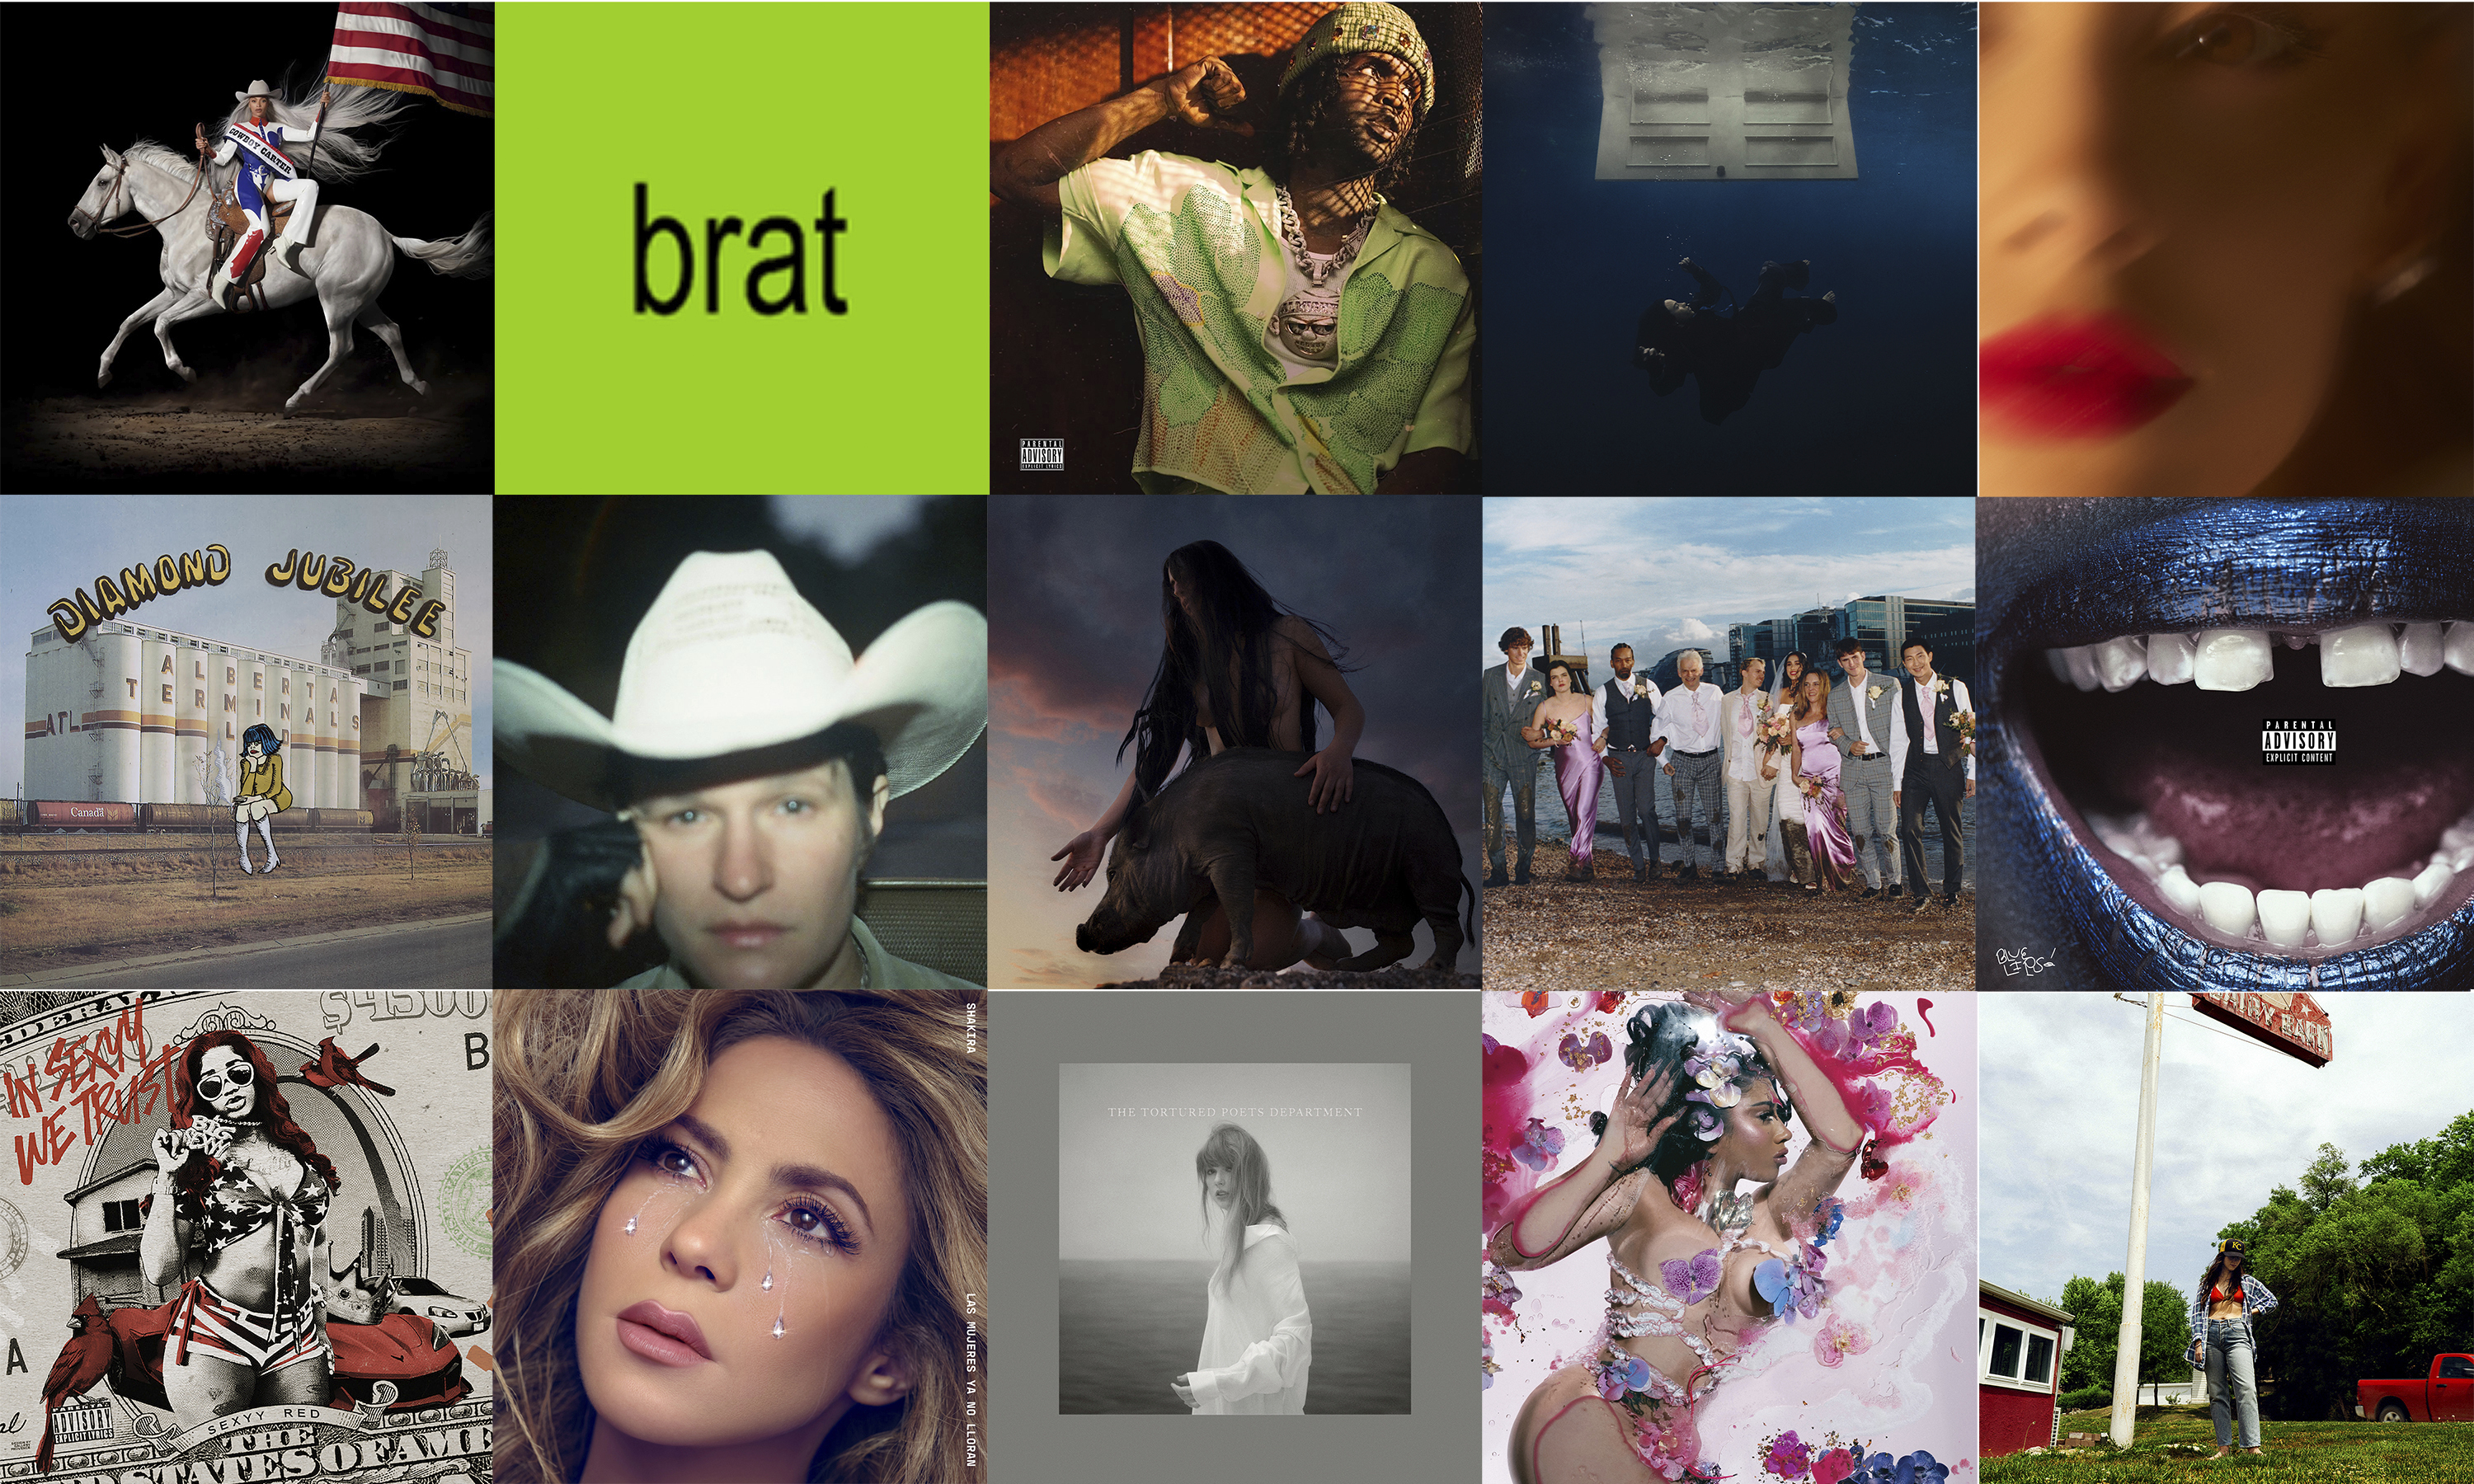 This combination of album covers shows, top row from left, "Act II: Cowboy Carter" by Beyonce (Parkwood/Columbia/Sony), "Brat" by Charli XCX (Atlantic), "Almighty So 2" by Chief Keef (43B), "Hit Me Hard and Soft" by Billie Eilish (Darkroom-Interscope), and "Eternal Sunshine" by Ariana Grande (Republic Records), second row from left, "Diamond Jubliee" by Cindy Lee (Realistik Studios), "Bright Future" by Adrianne Lenker (4AD), "I Got Heaven" by Mannequin Pussy (Epitaph), "Right Place, Wrong Person" by RM (BigHit), and "Blue Lips" by Schoolboy Q (Interscope), bottom row from left, "In Sexyy We Trust" by Sexyy Red (Rebel/gamma), "Las Mujeres Ya No Lloran" by Shakira (Sony), "The Tortured Poets Department" by Taylor Swift (Republic), "Orquídeas" by Kali Uchis (Geffen) and "Tigers Blood" by Waxahatchee (ANTI Records). (AP Photo)